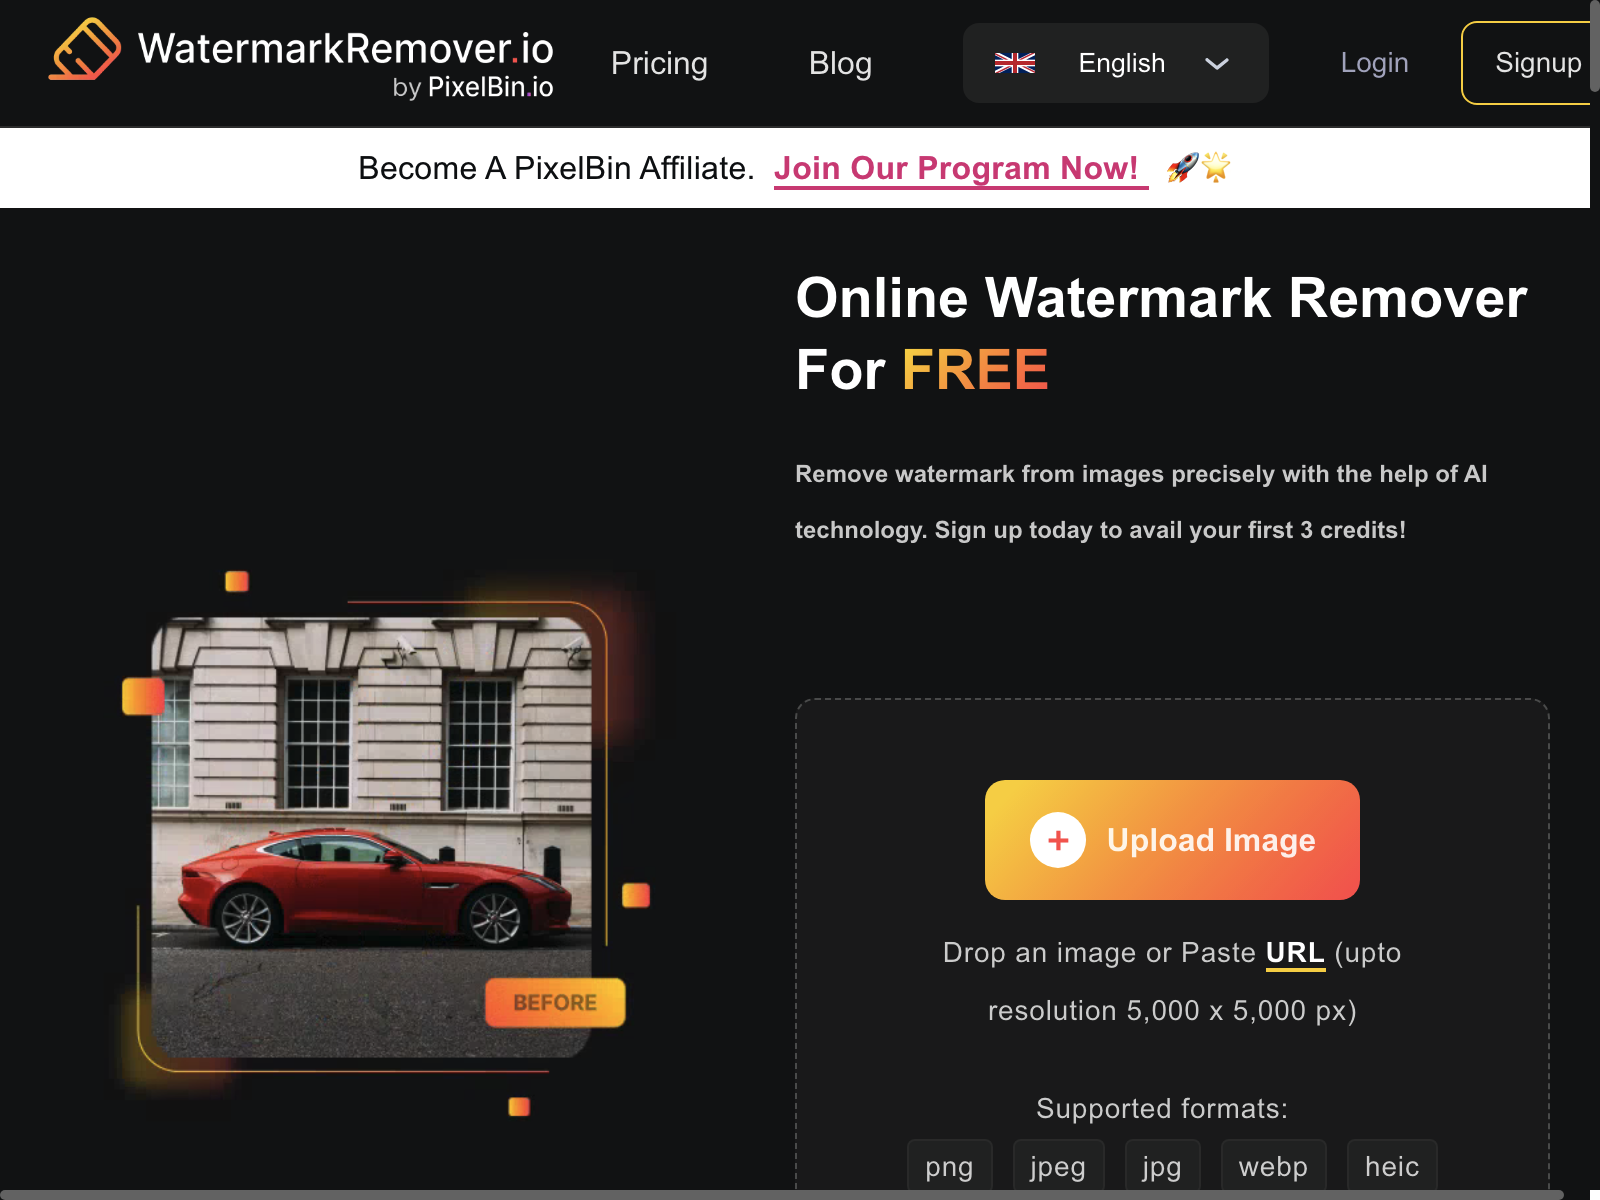 watermark remover io Review: Pros, Cons, Alternatives